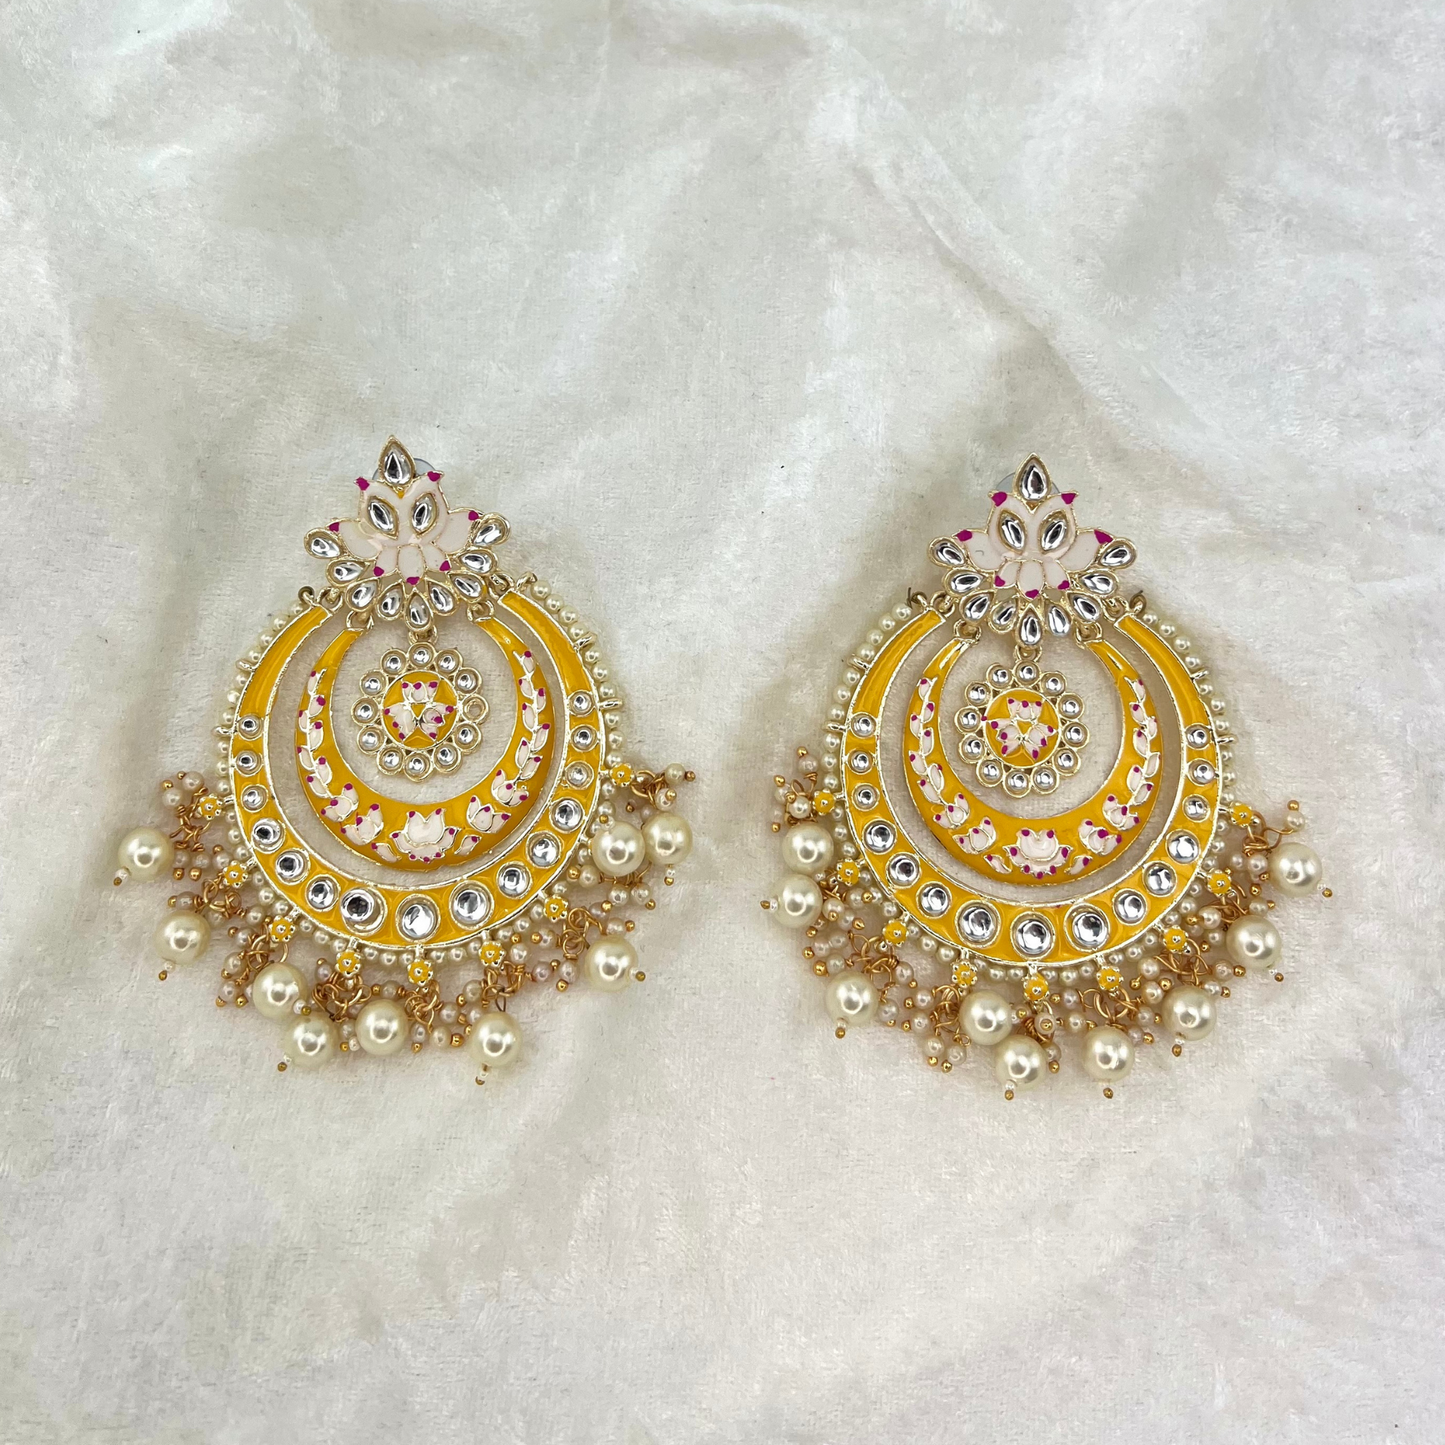 Large Indian Wedding Earrings in yellow with pearls